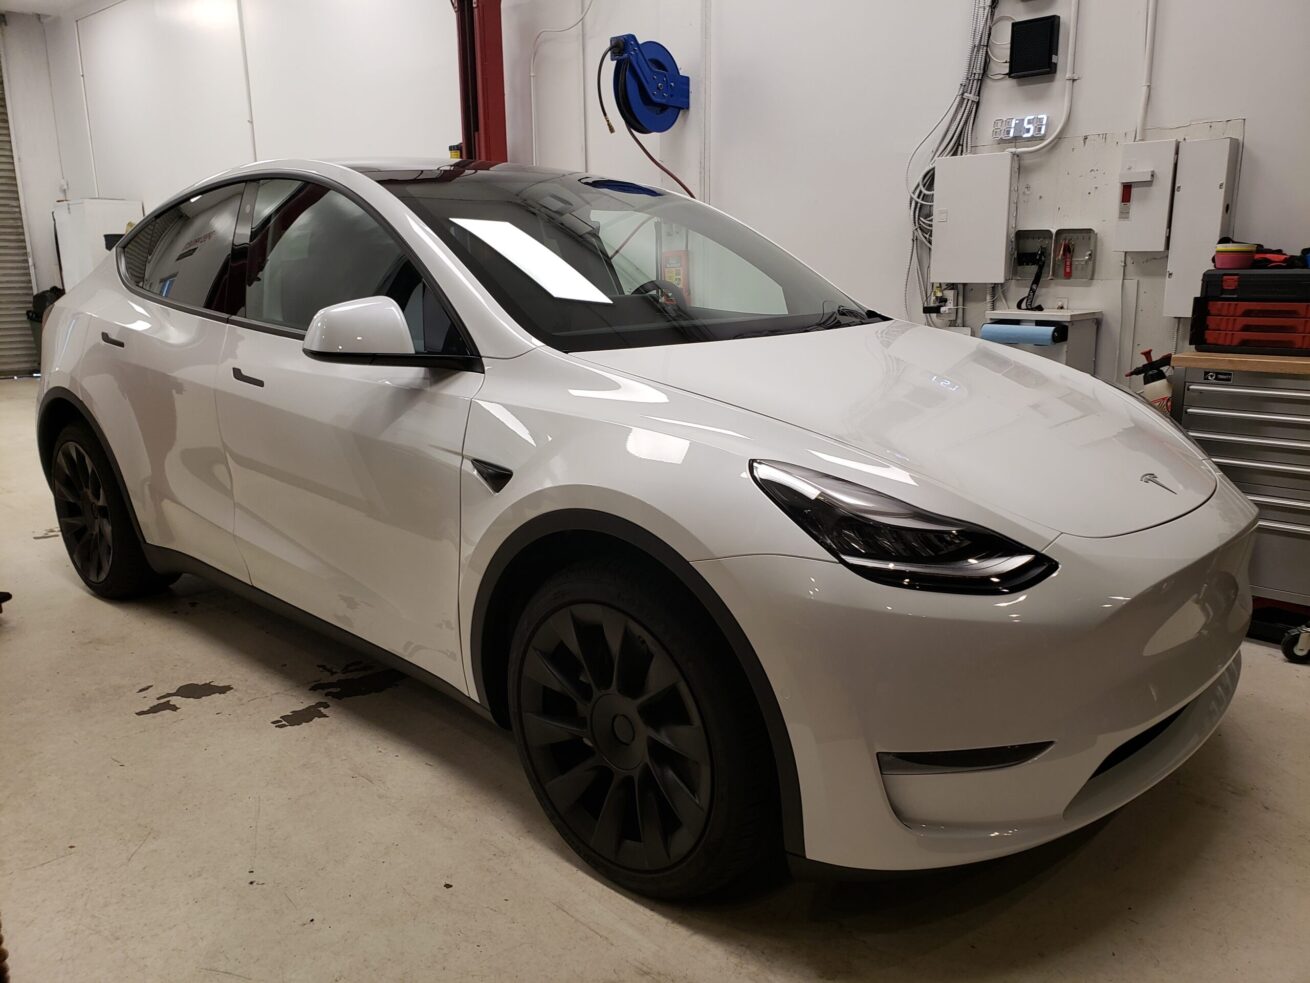 Tesla Model Y Full Front End, Headlights, Luggage, and Interior